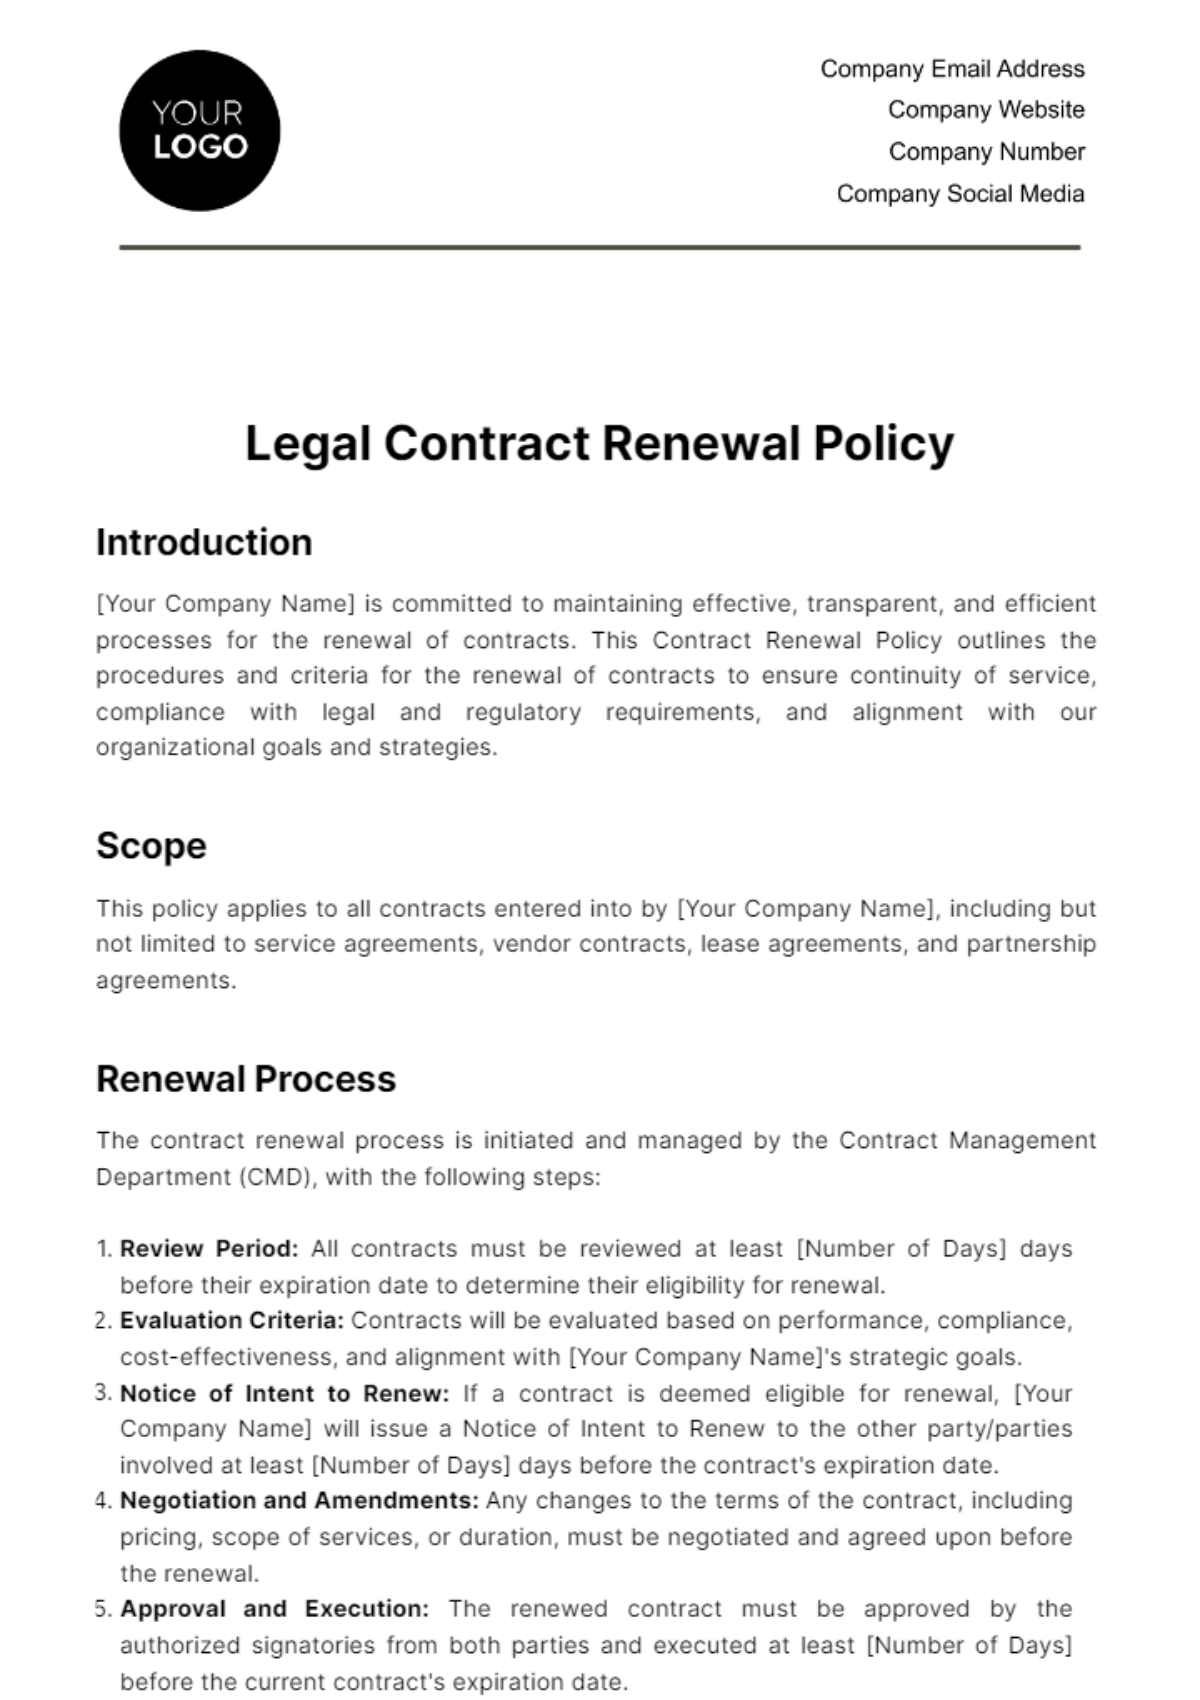 Legal Contract Renewal Policy Template